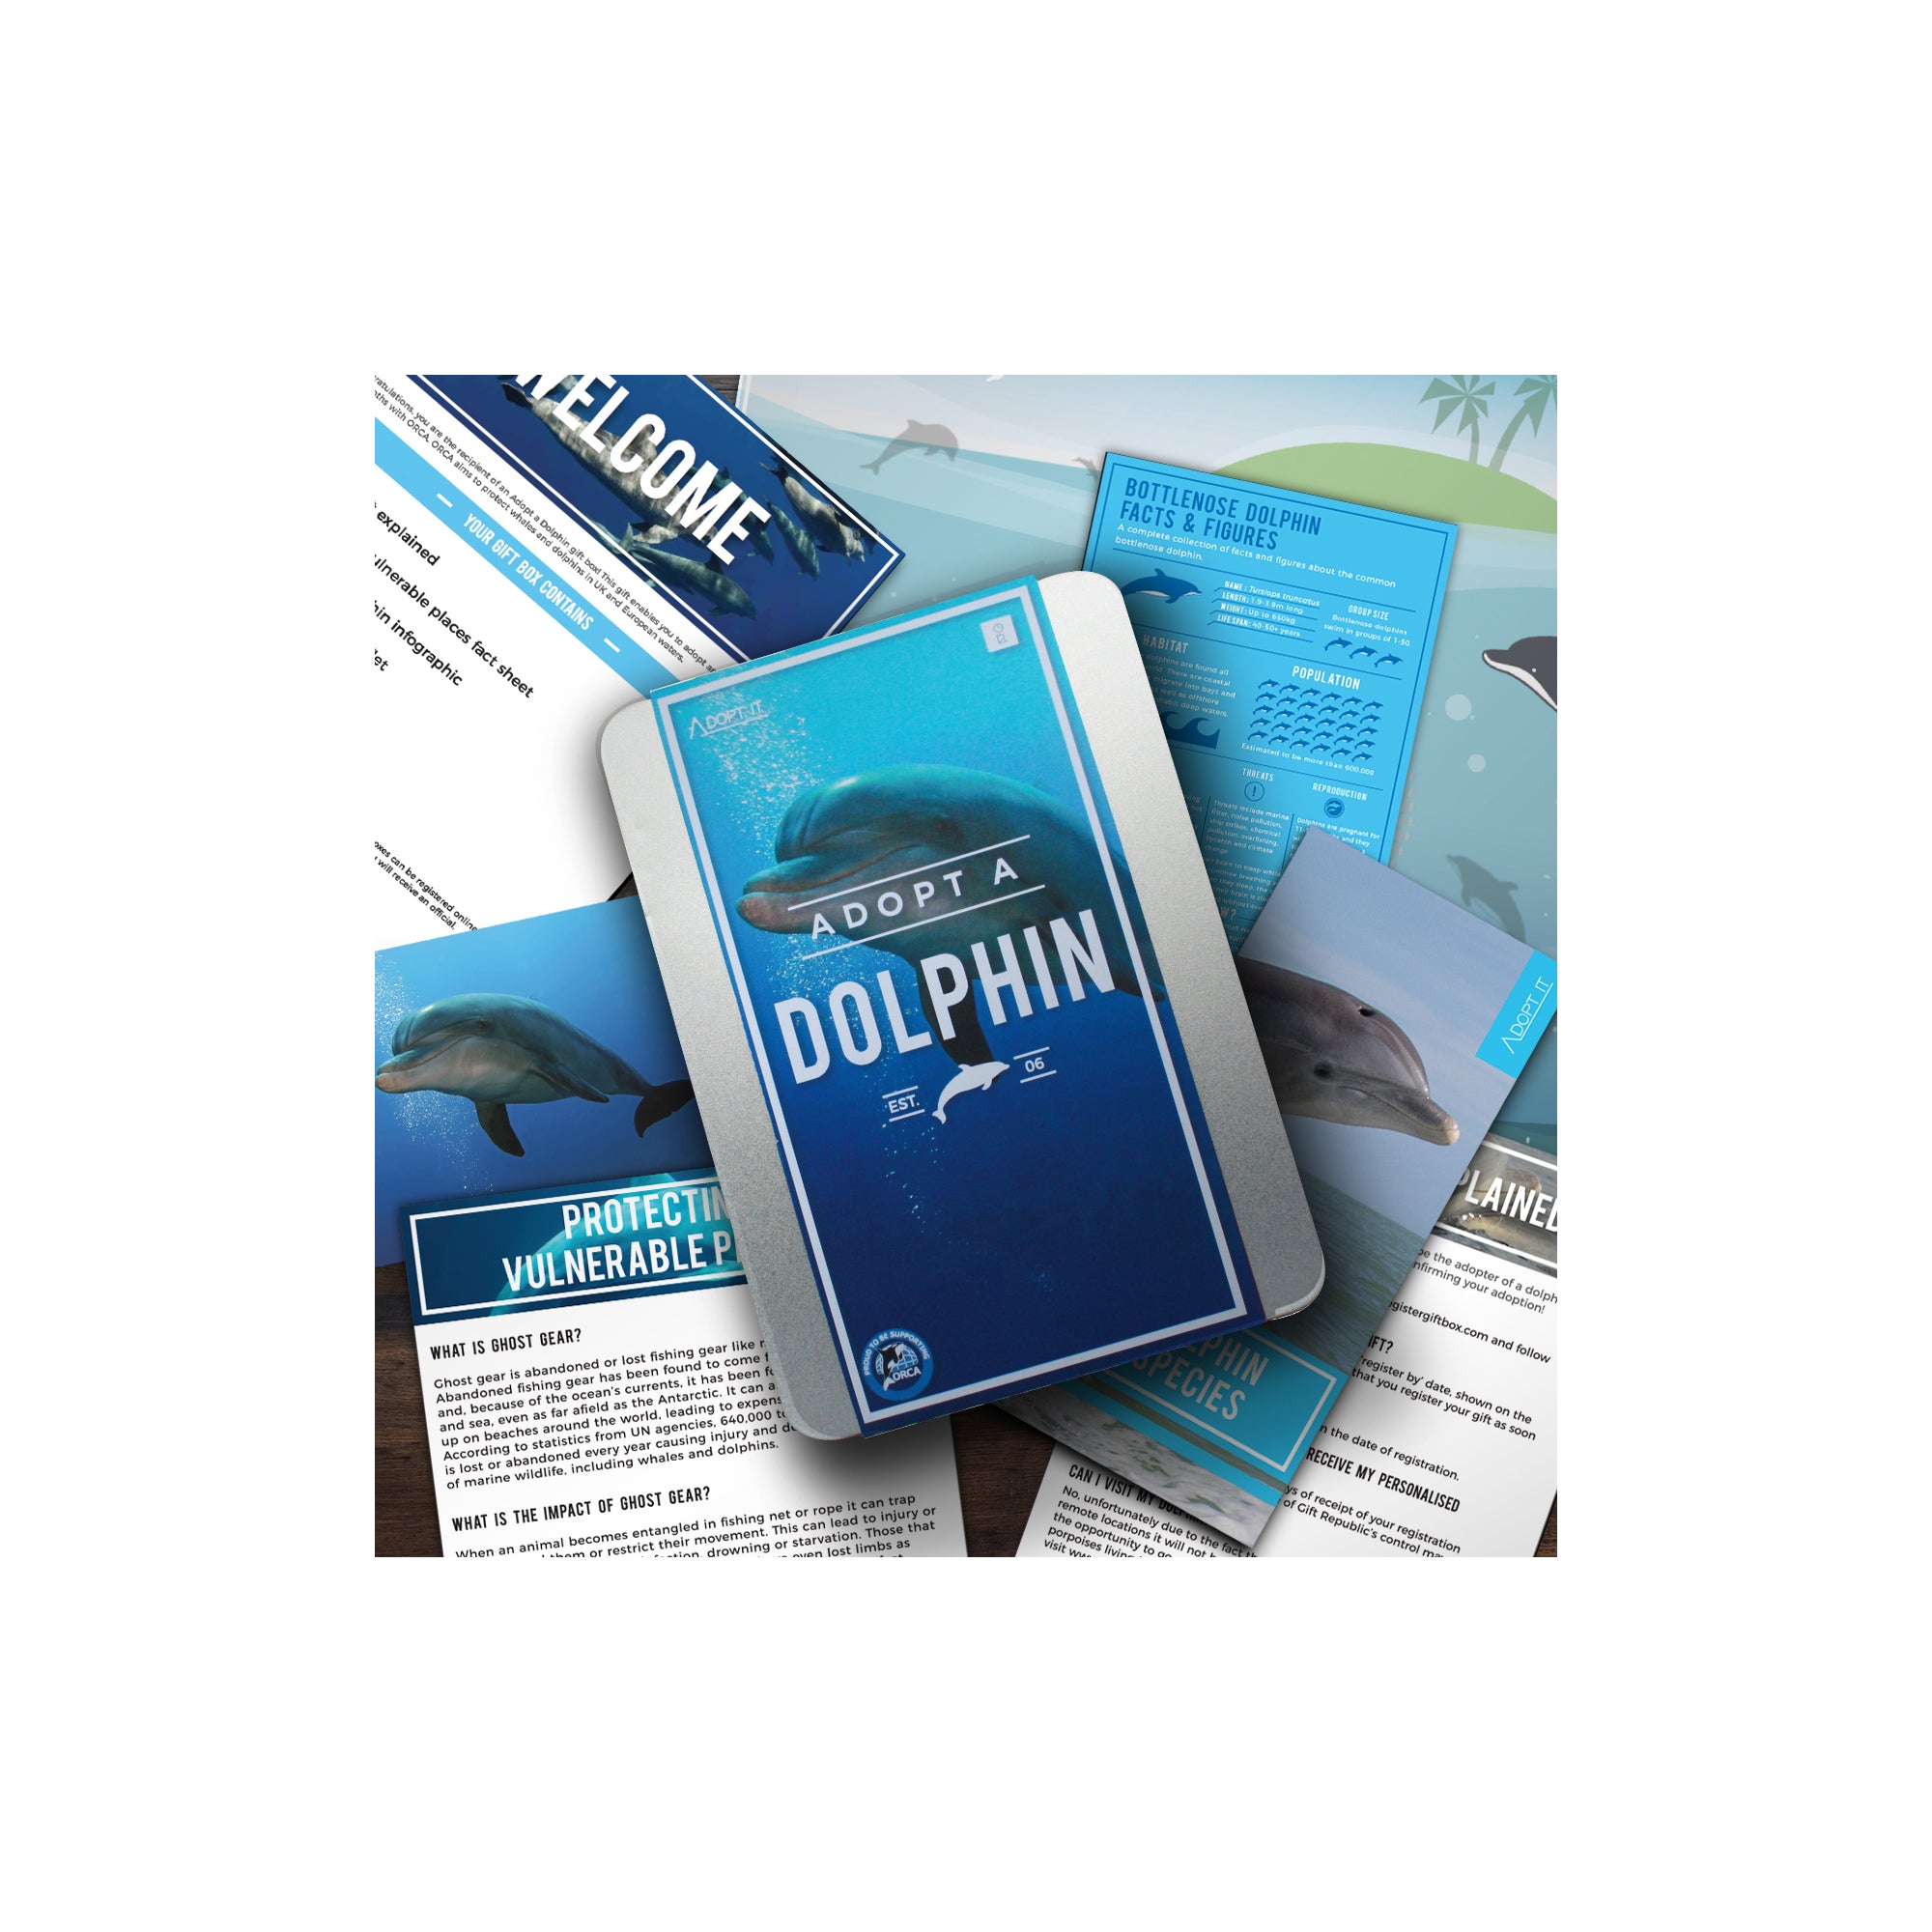 People's Trust For Endangered Species Adoption Kit - Dolphin